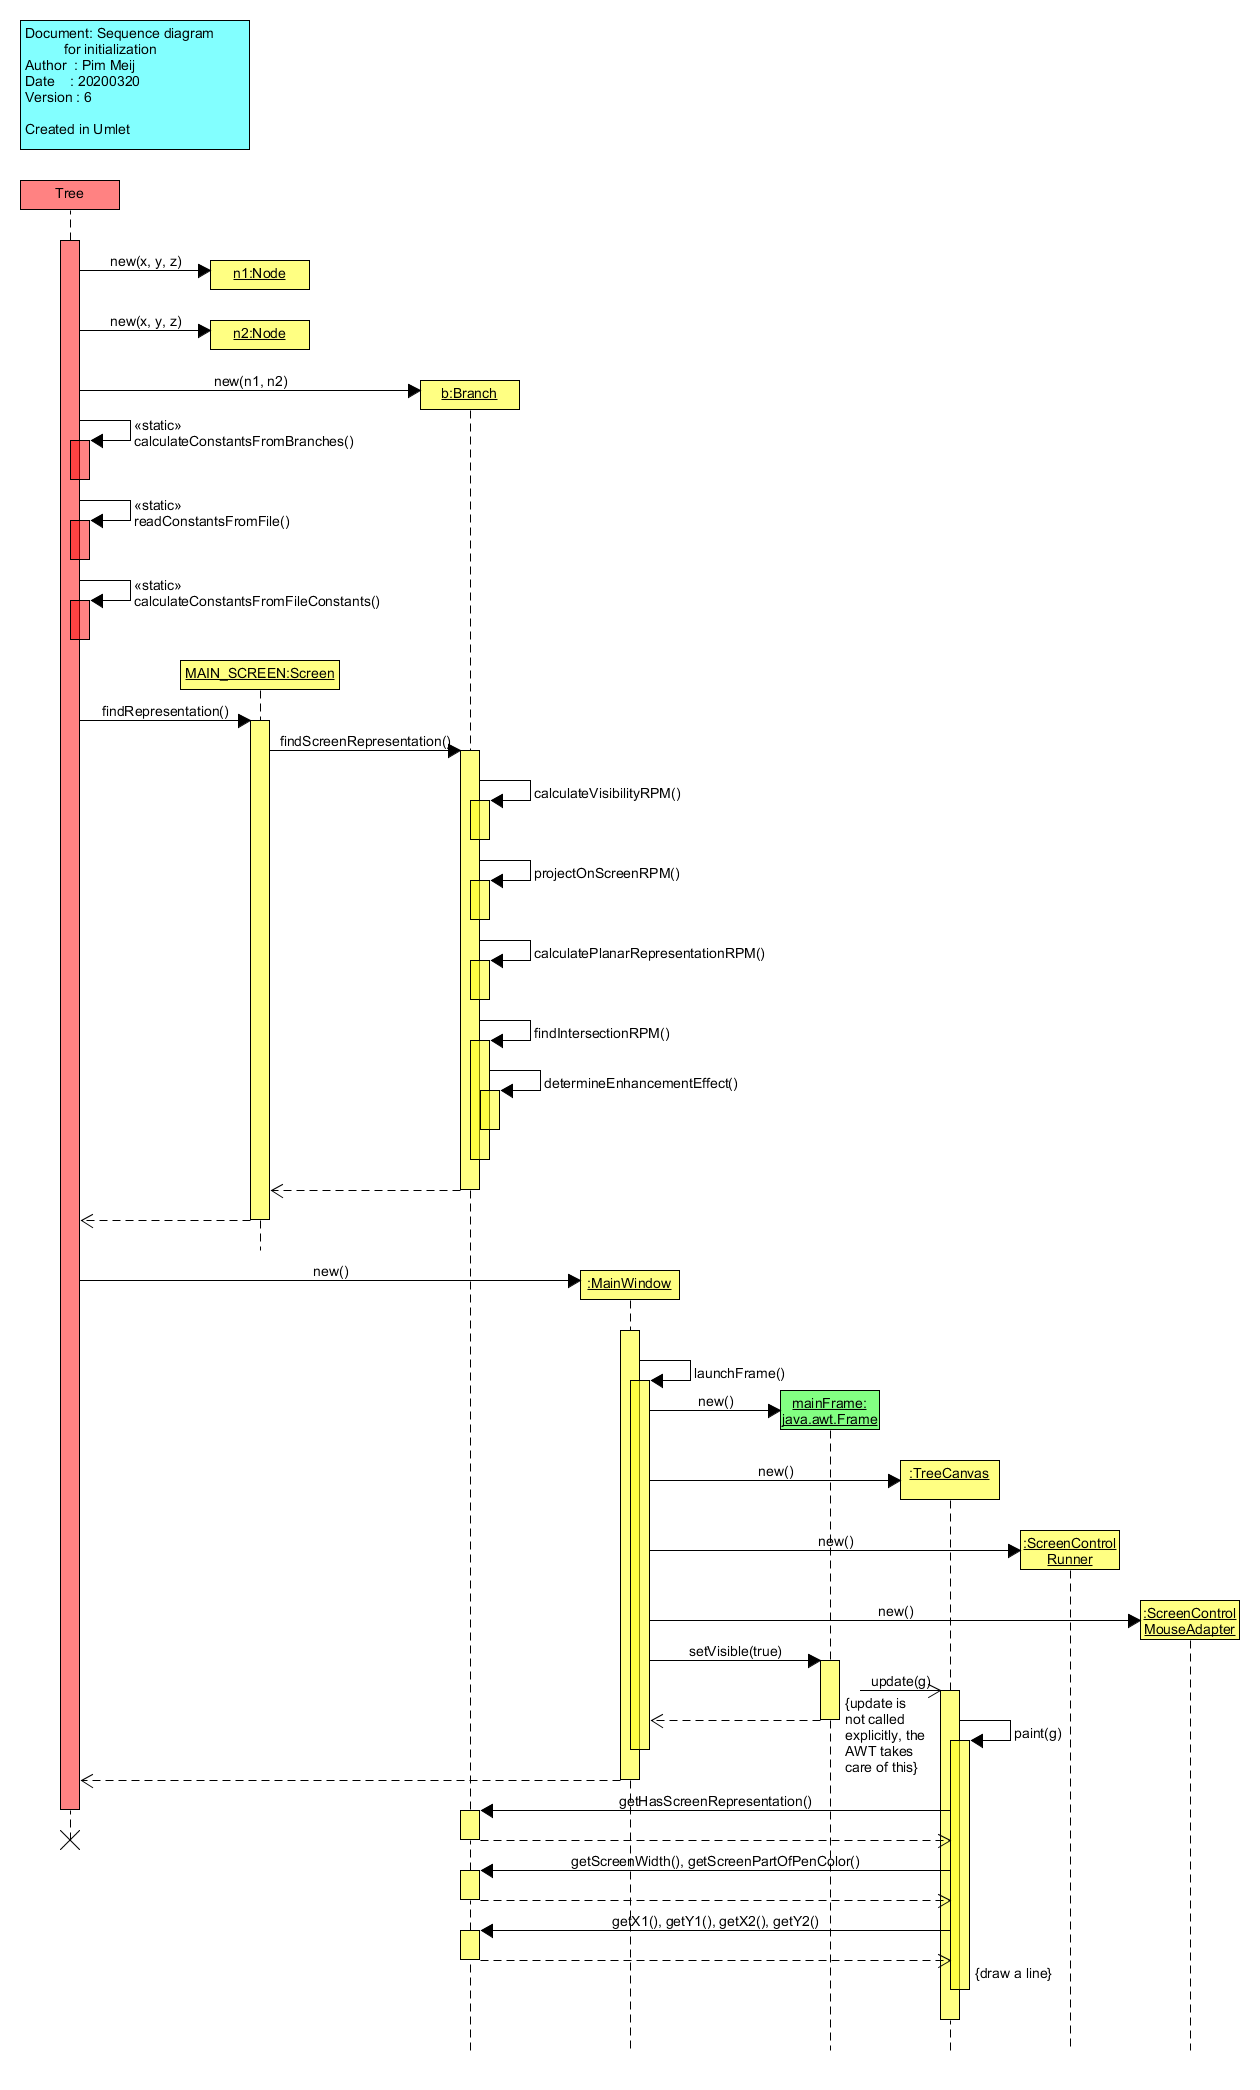 The Tree Project sequence diagram for initialization